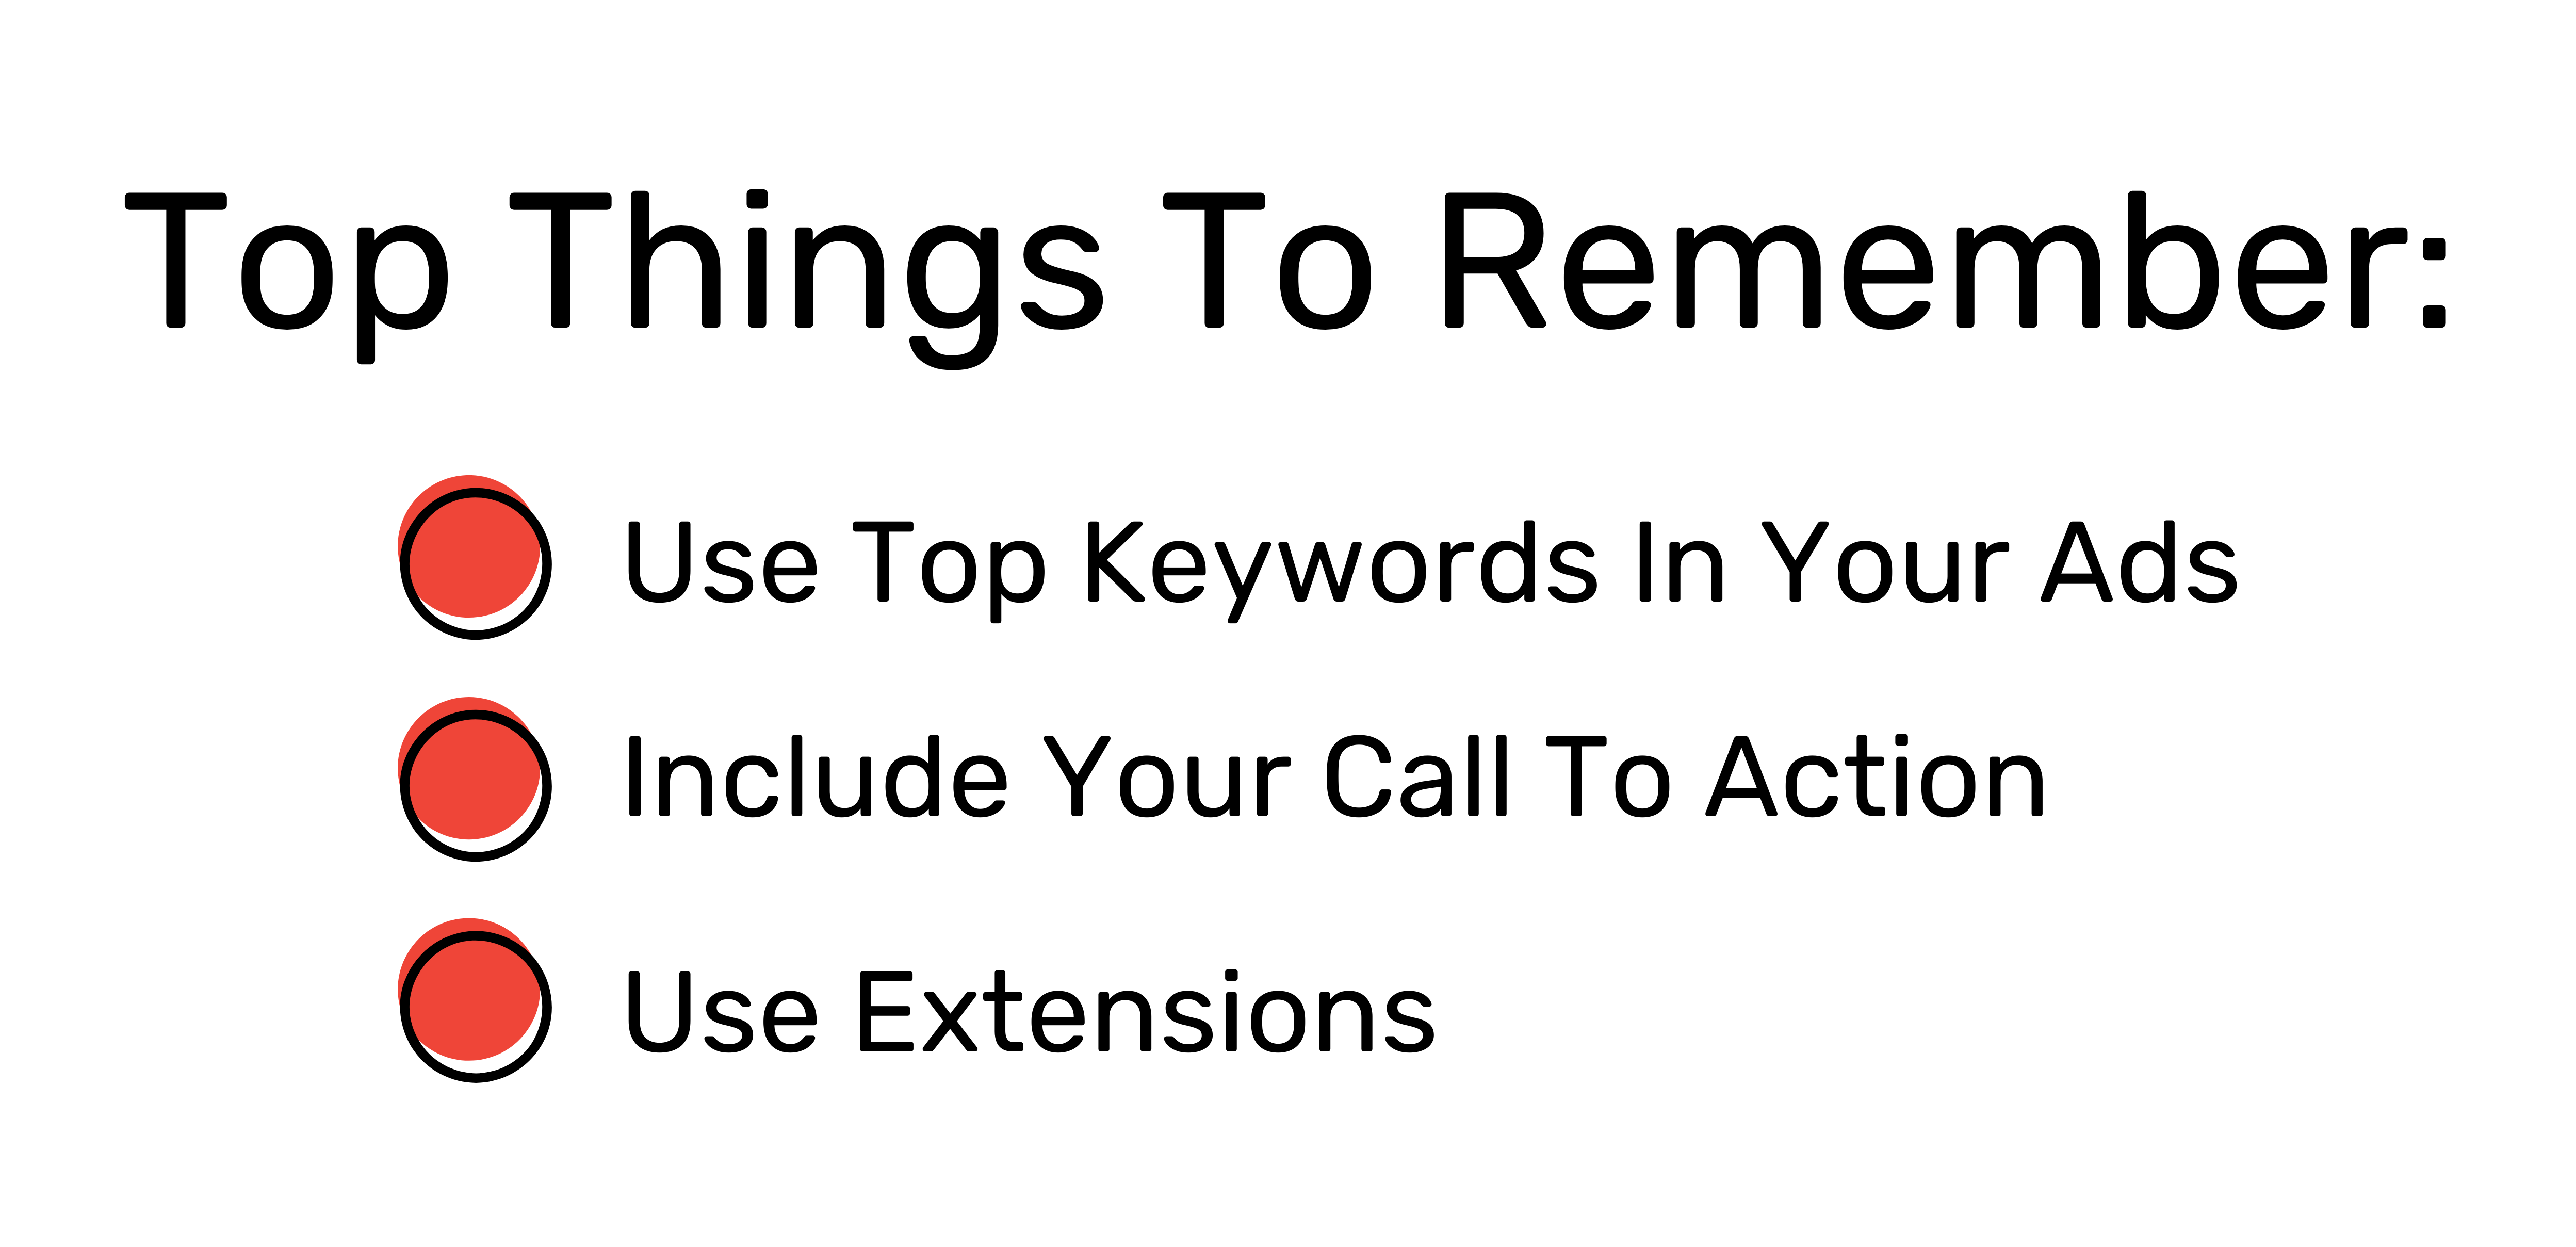 Top things to Remember: Use top keywords in your ads, include your call to action, and use extensions